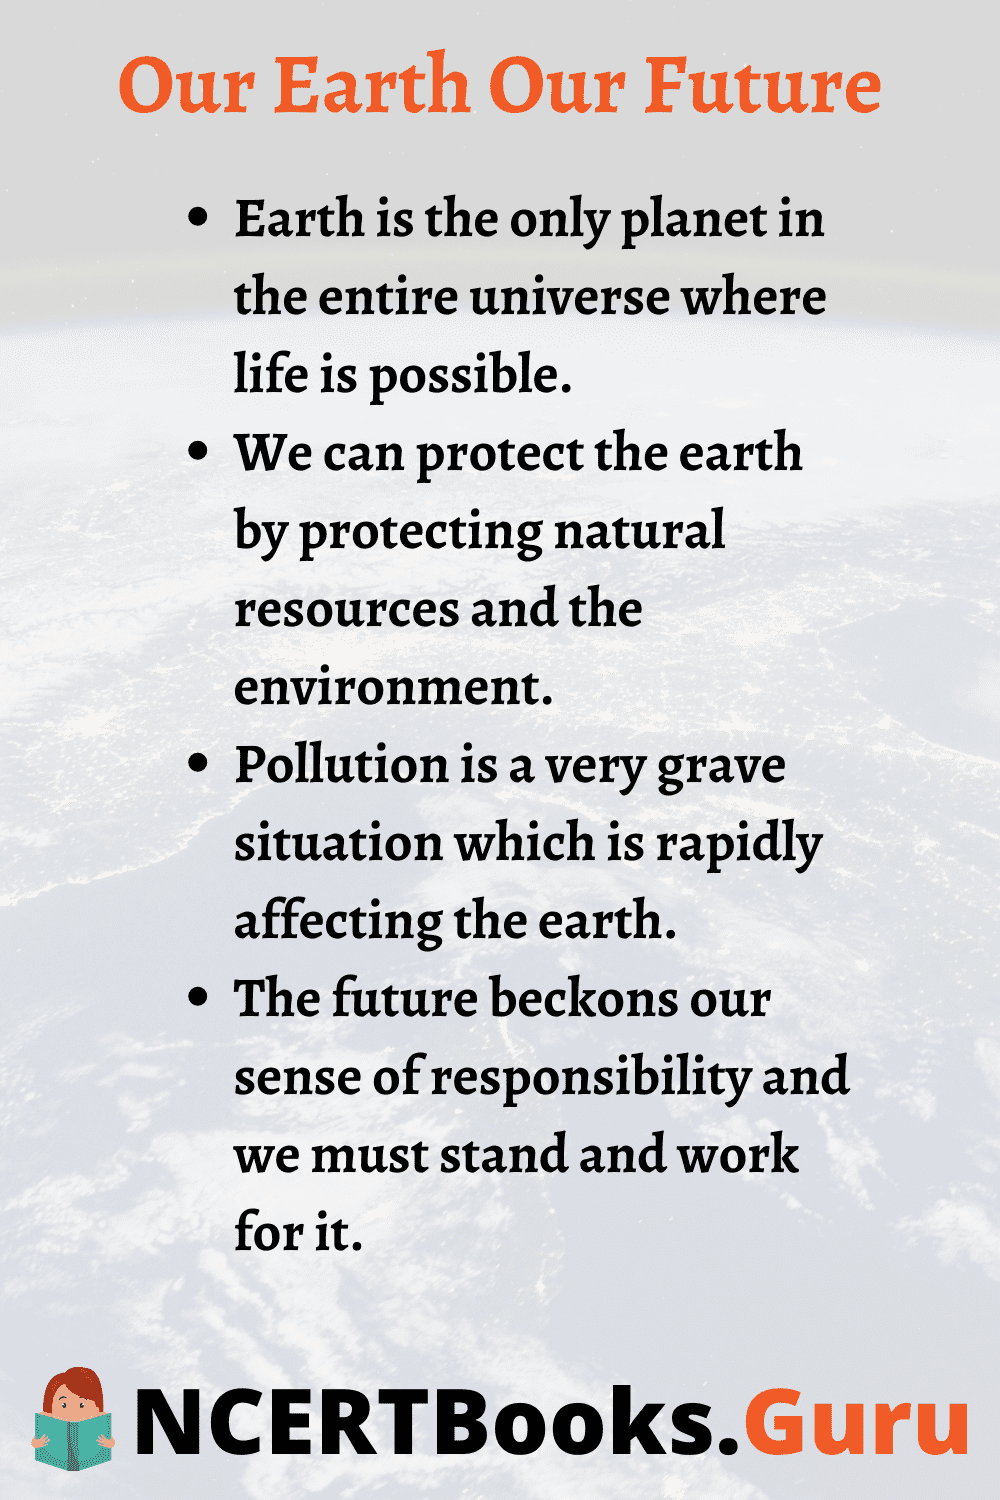 Our Earth Our Future Essay